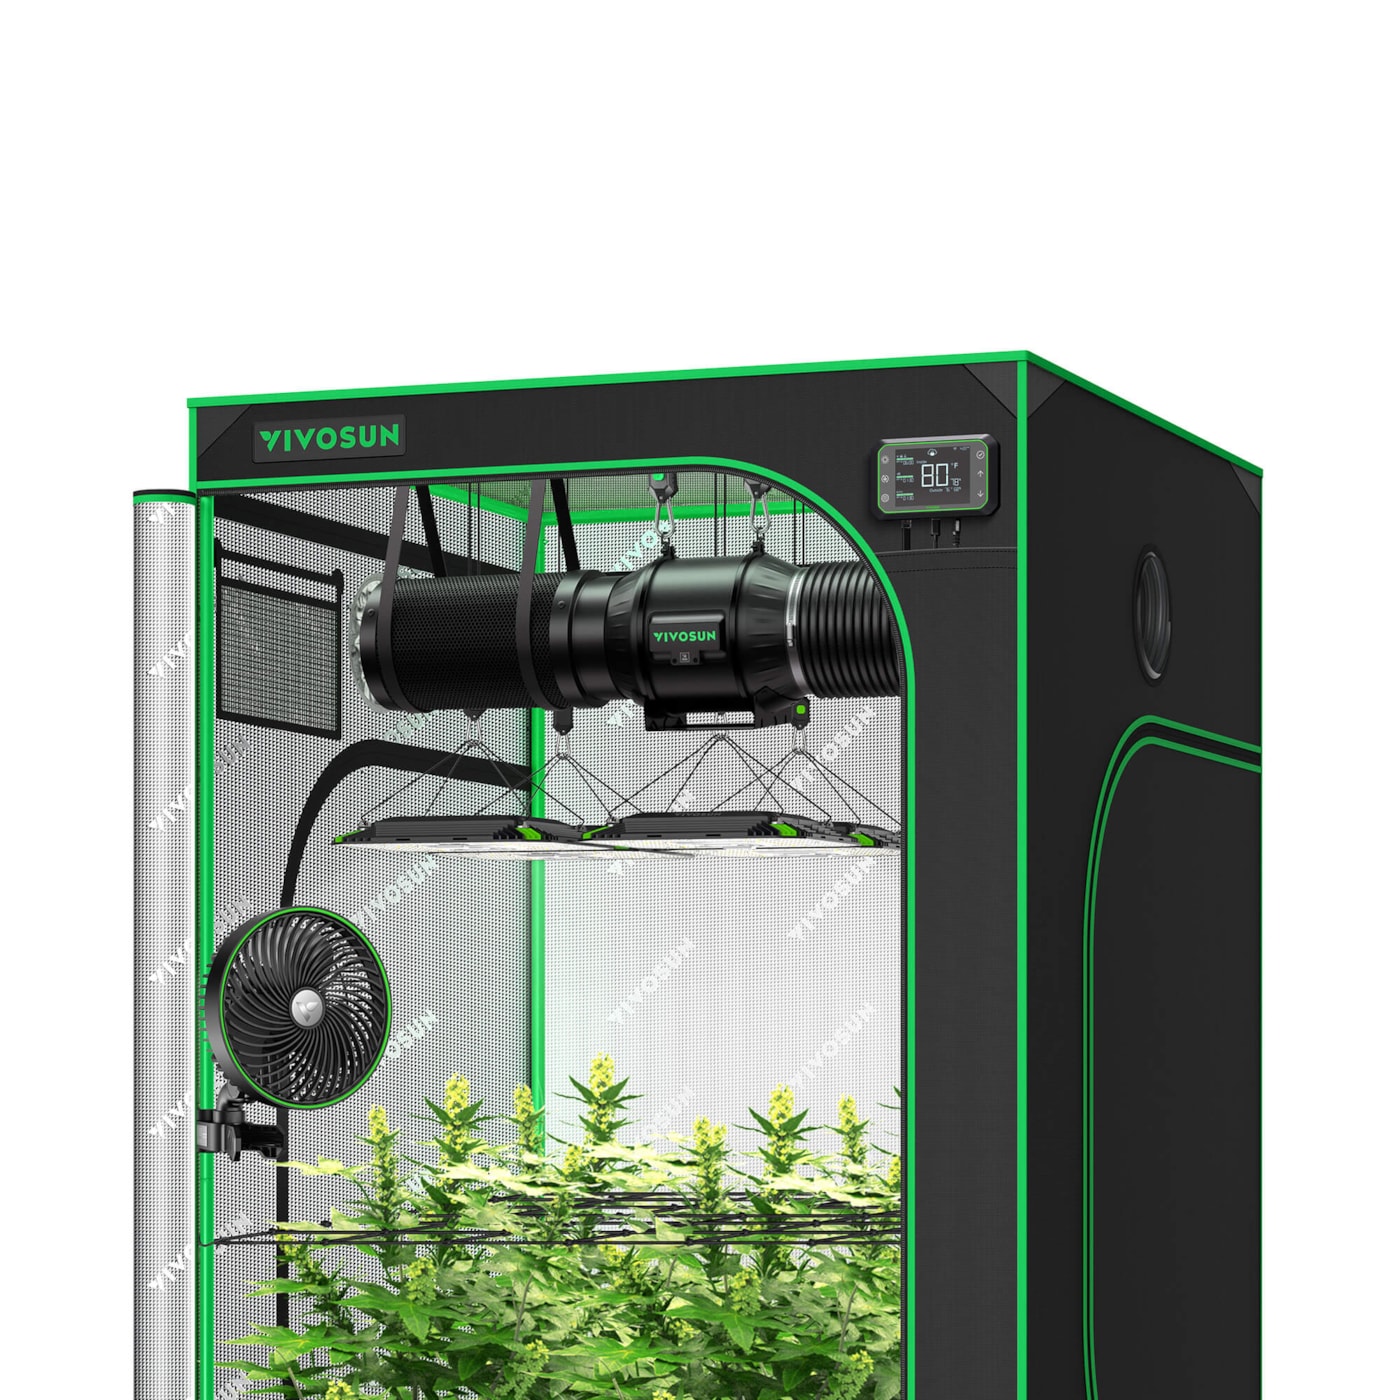 Smart Grow Tent System 4x4,4-Plant Kit,400W Led Grow Light with Integrated Circulation Fan, WIFI Automate Ventilation Controls